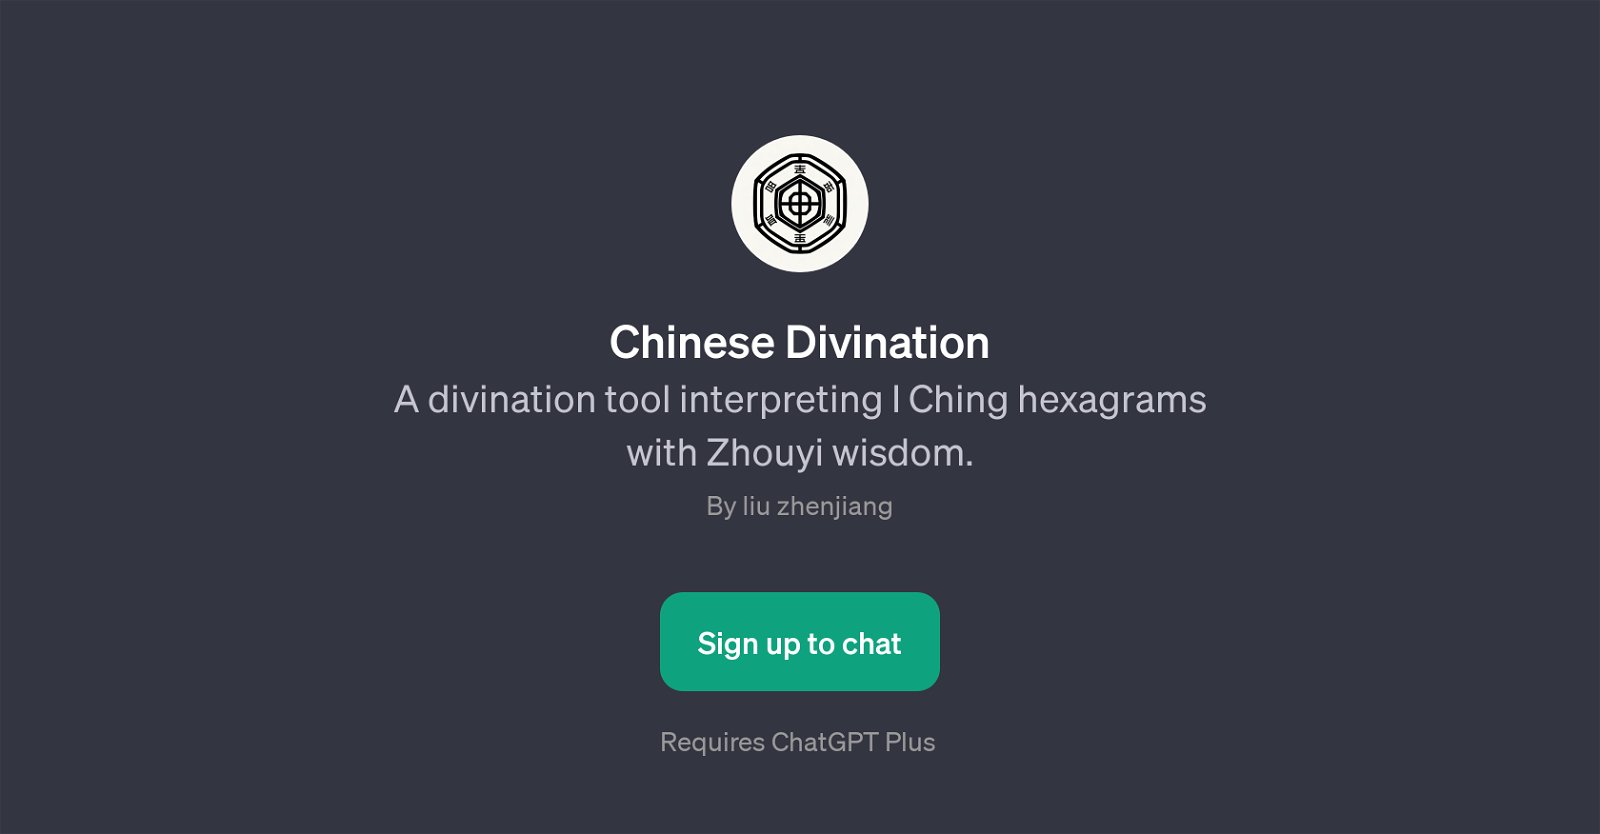 Chinese Divination website